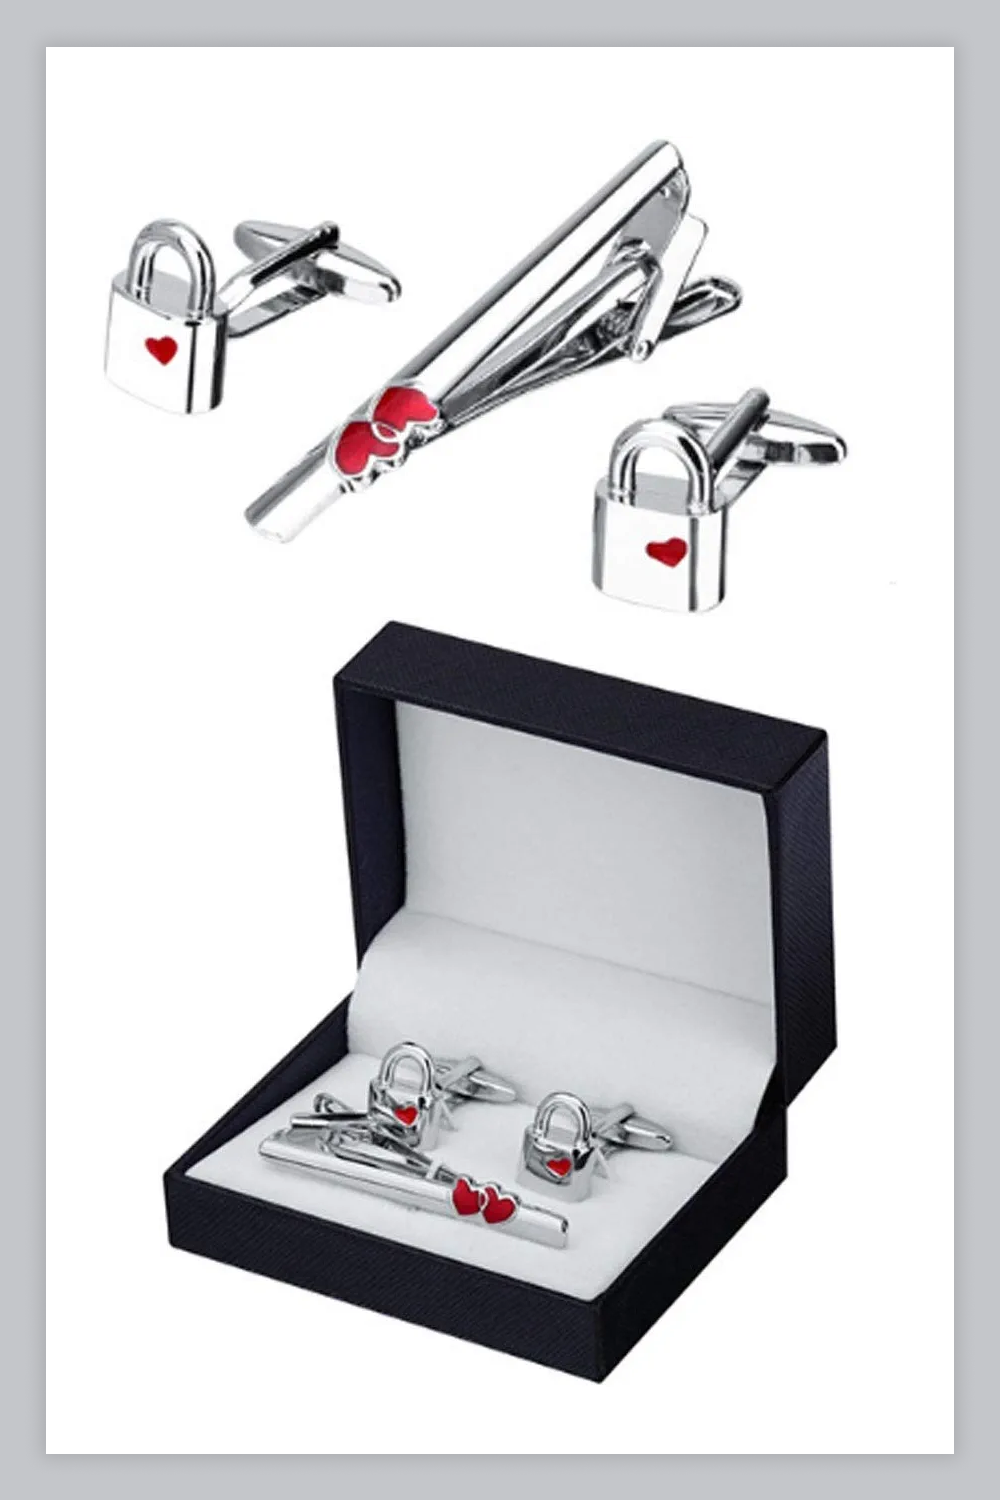 SDFGH and Creative Modeling Tie Clip Cufflinks Set Silver Business Clothing Jewelry Accessories.